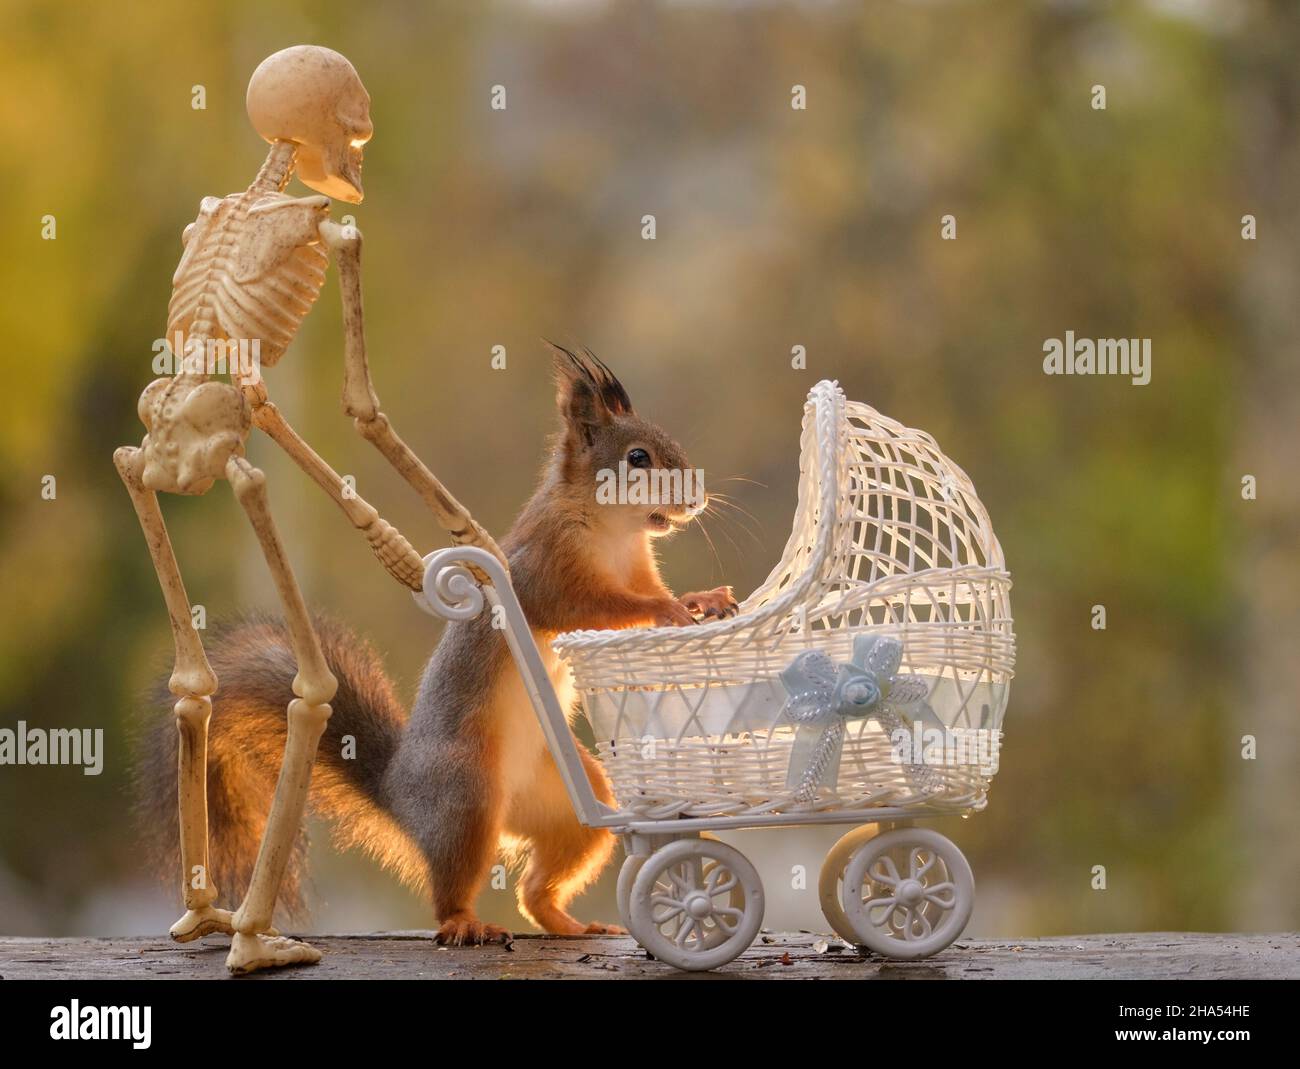 red squirrel is standing behind a stroller with a skeleton Stock Photo